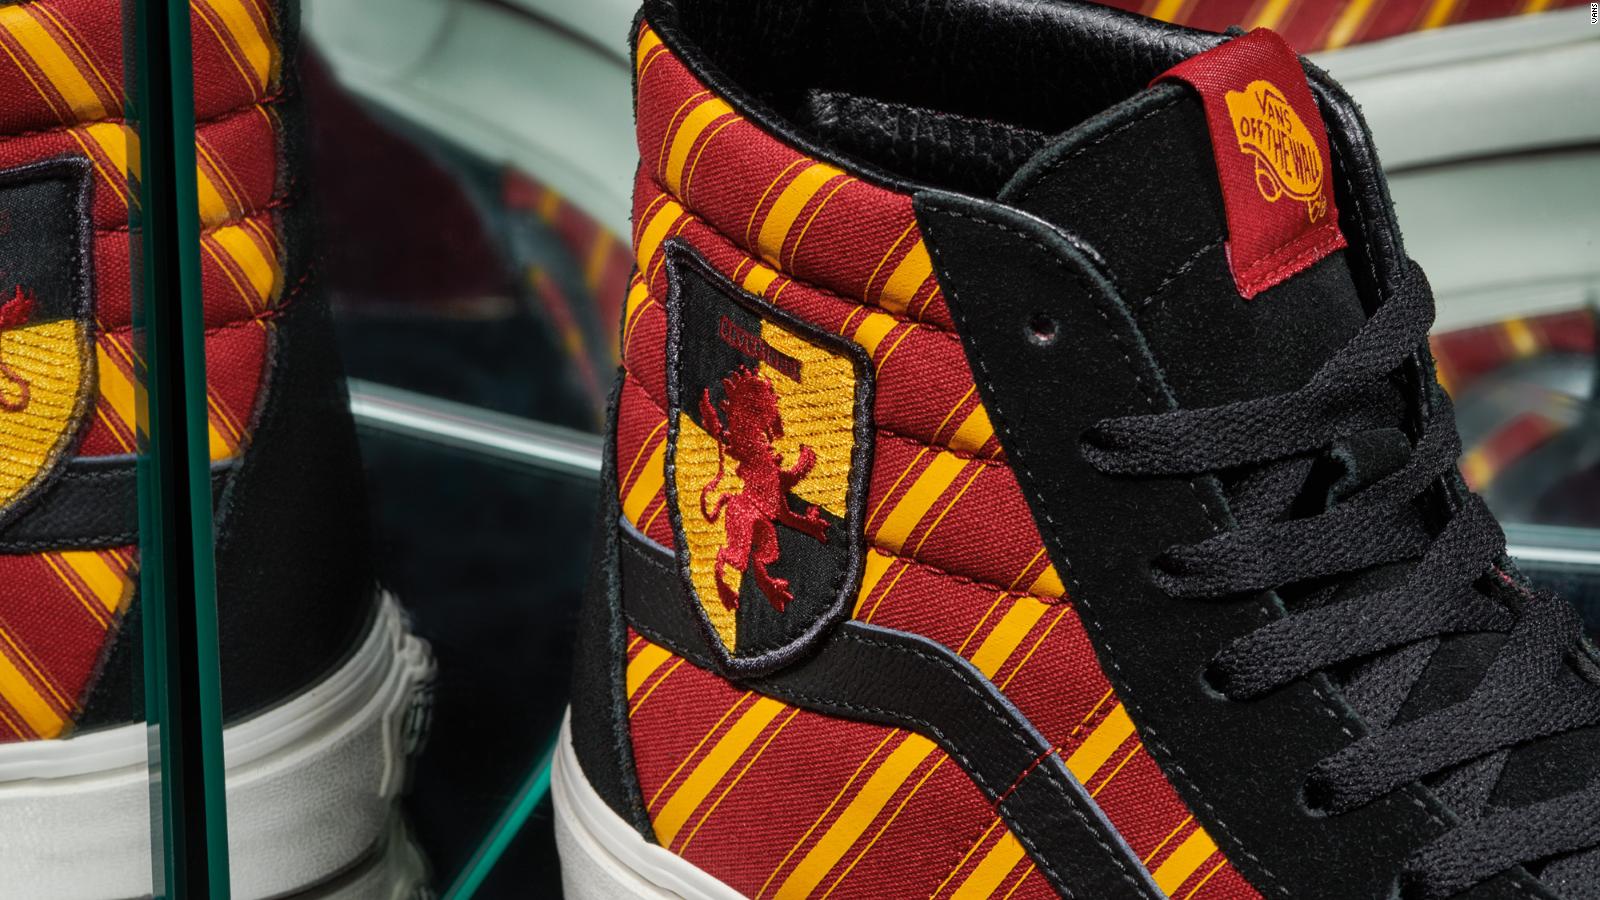 Harry Potter sneaker collection goes on sale - CNN Style